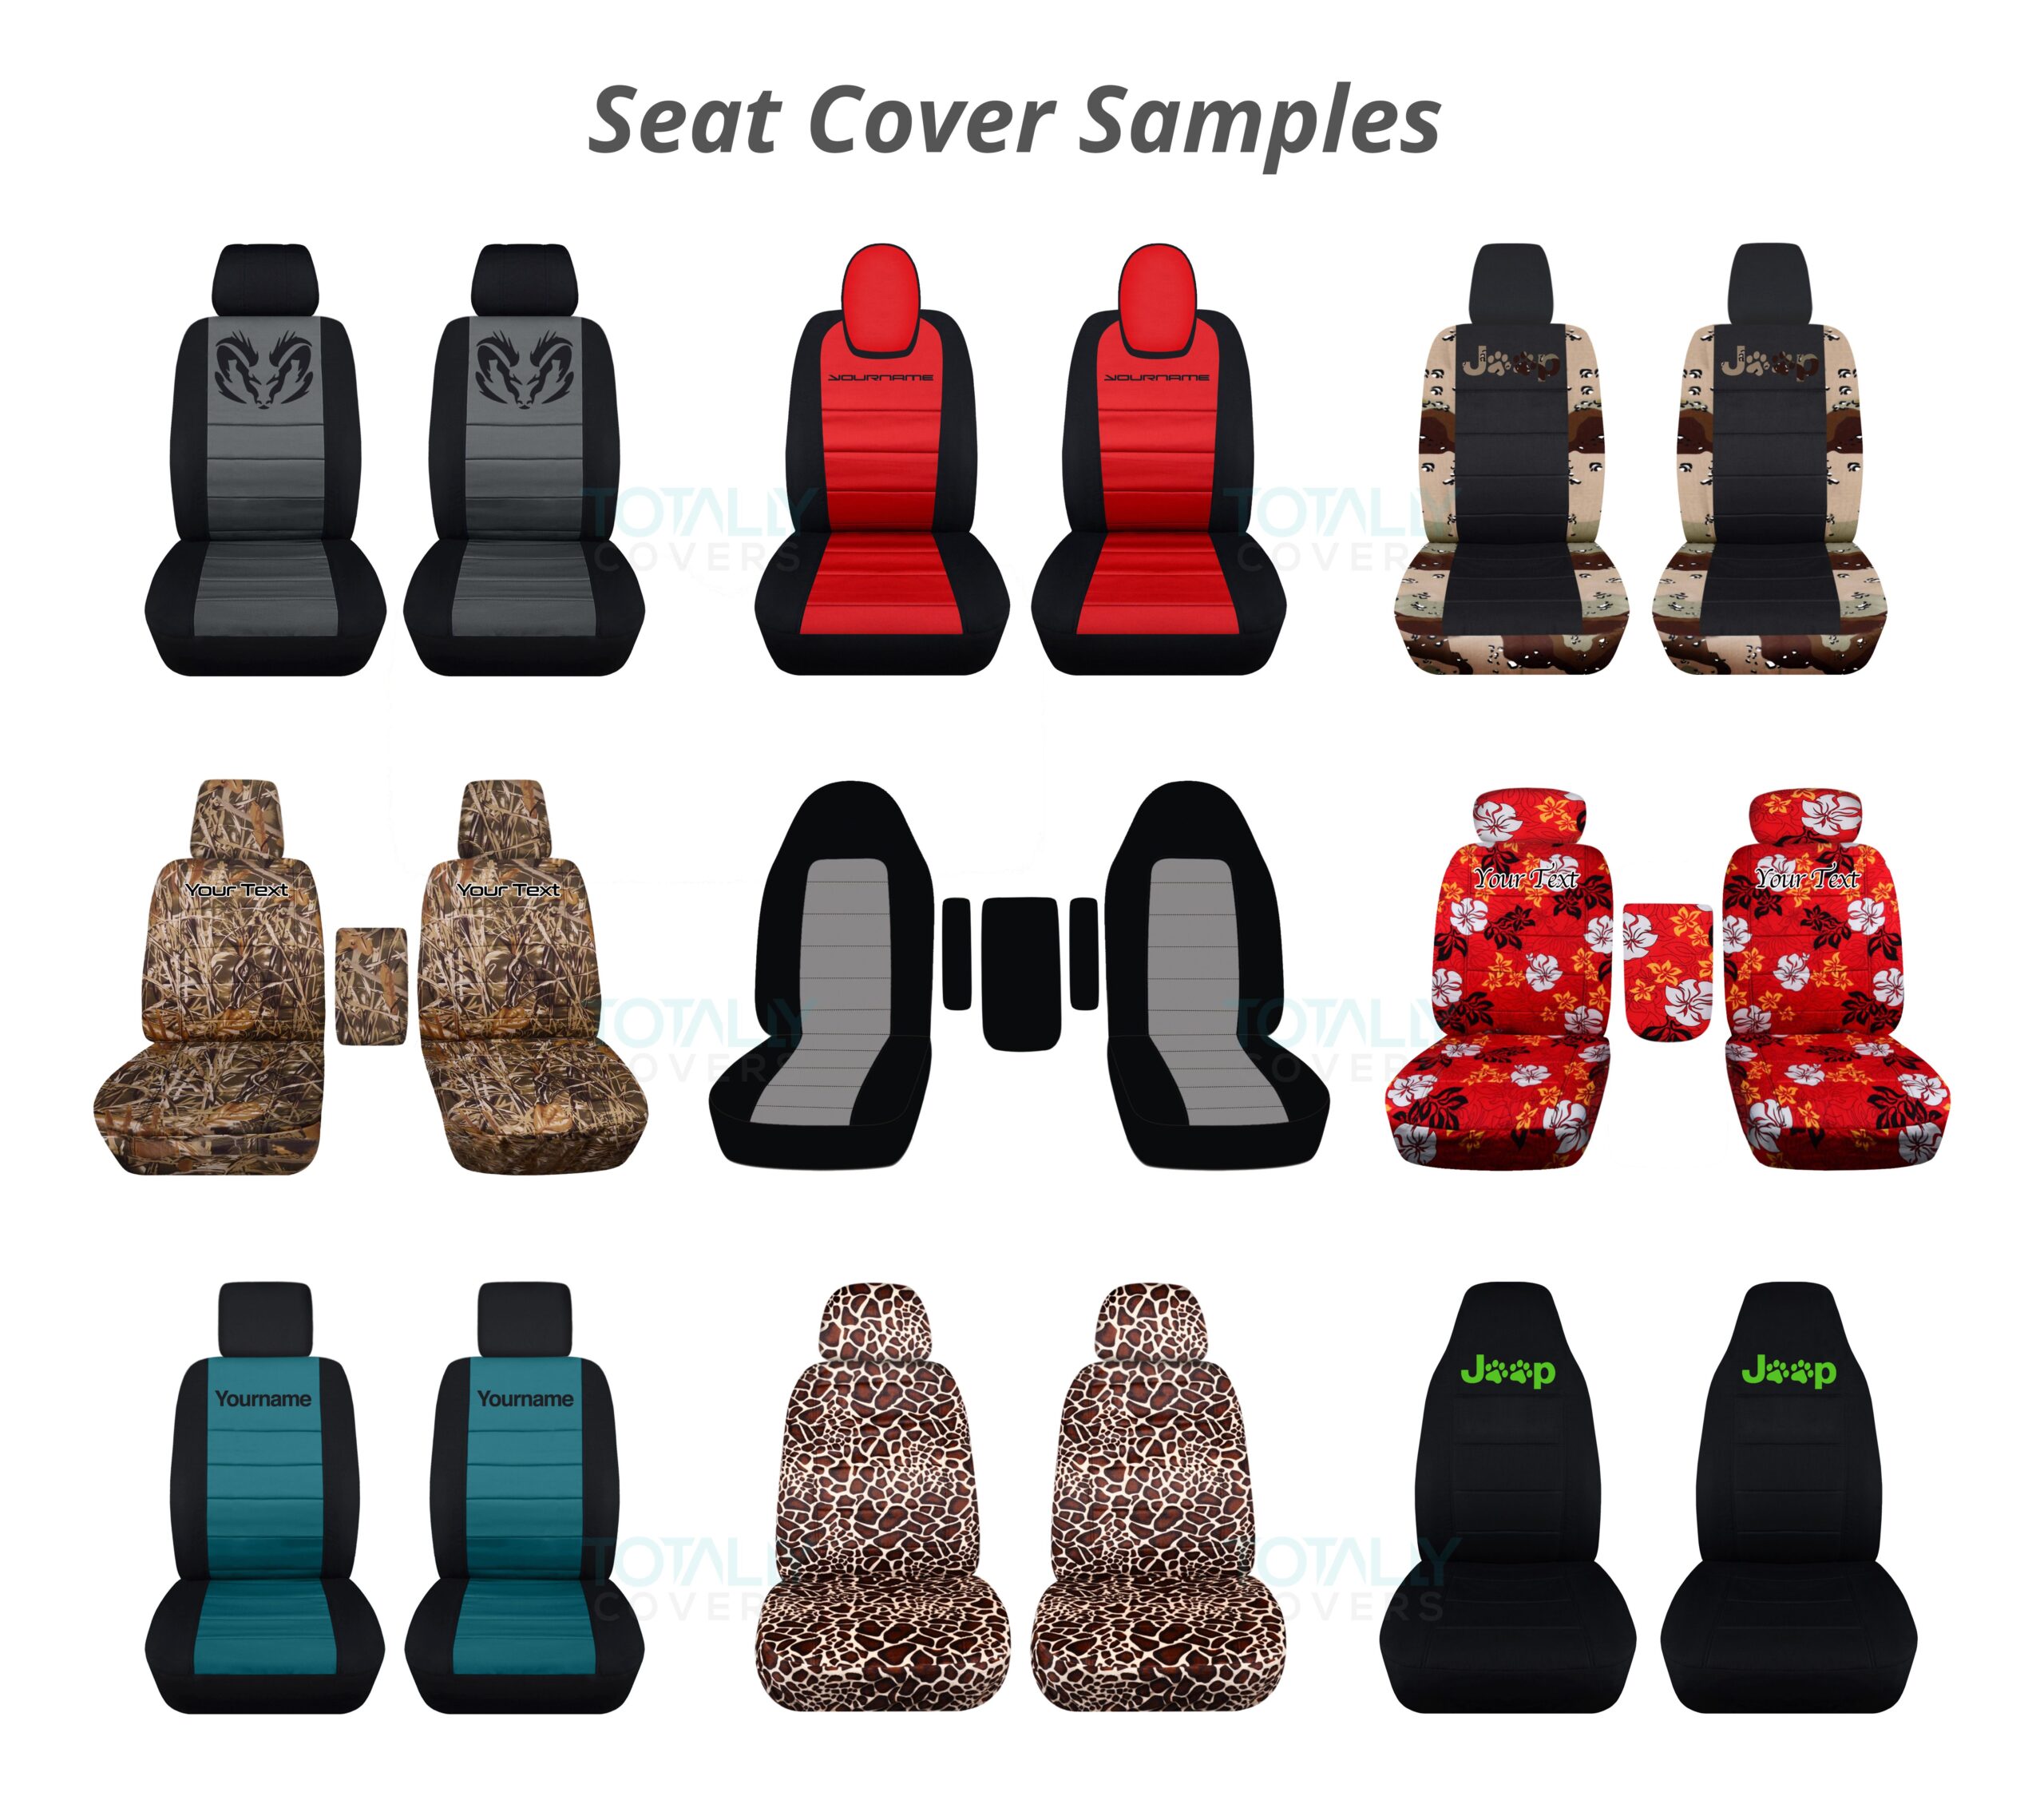 Factors that affect car’s seats and boost the use of car seat covers